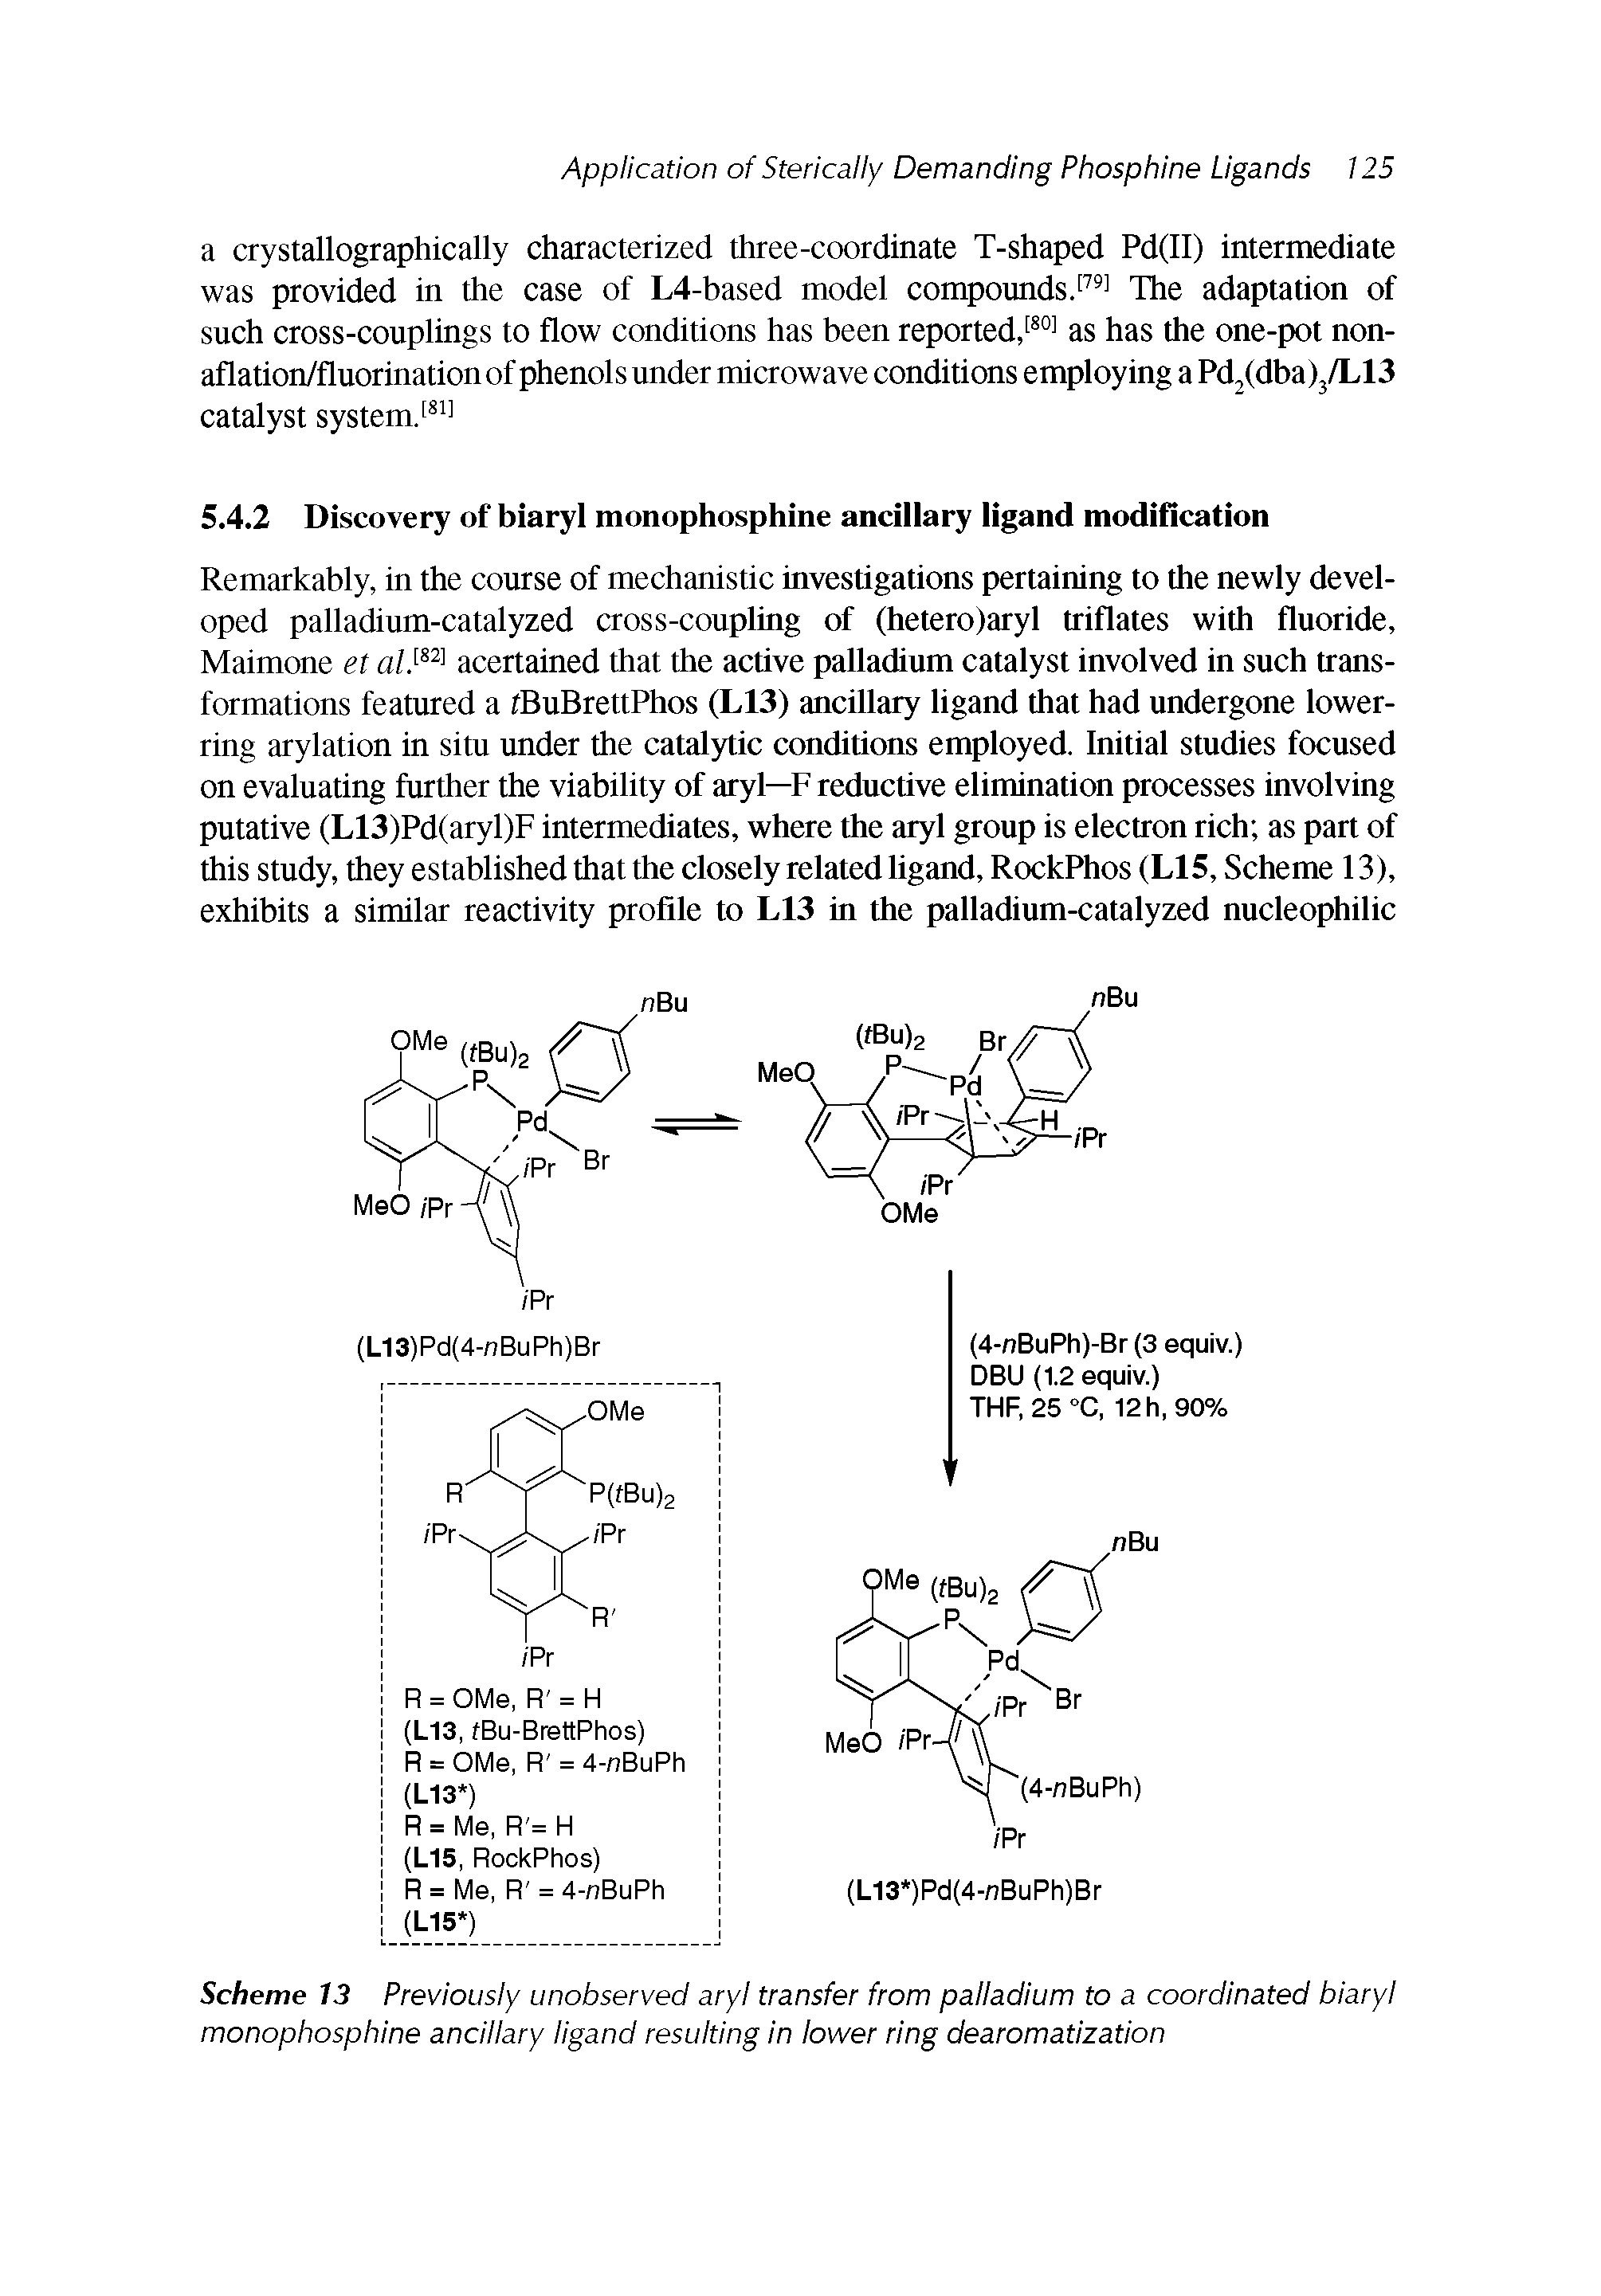 Scheme 13 Previously unobserved aryl transfer from palladium to a coordinated biaryl monophosphine ancillary ligand resulting in lower ring dearomatization...